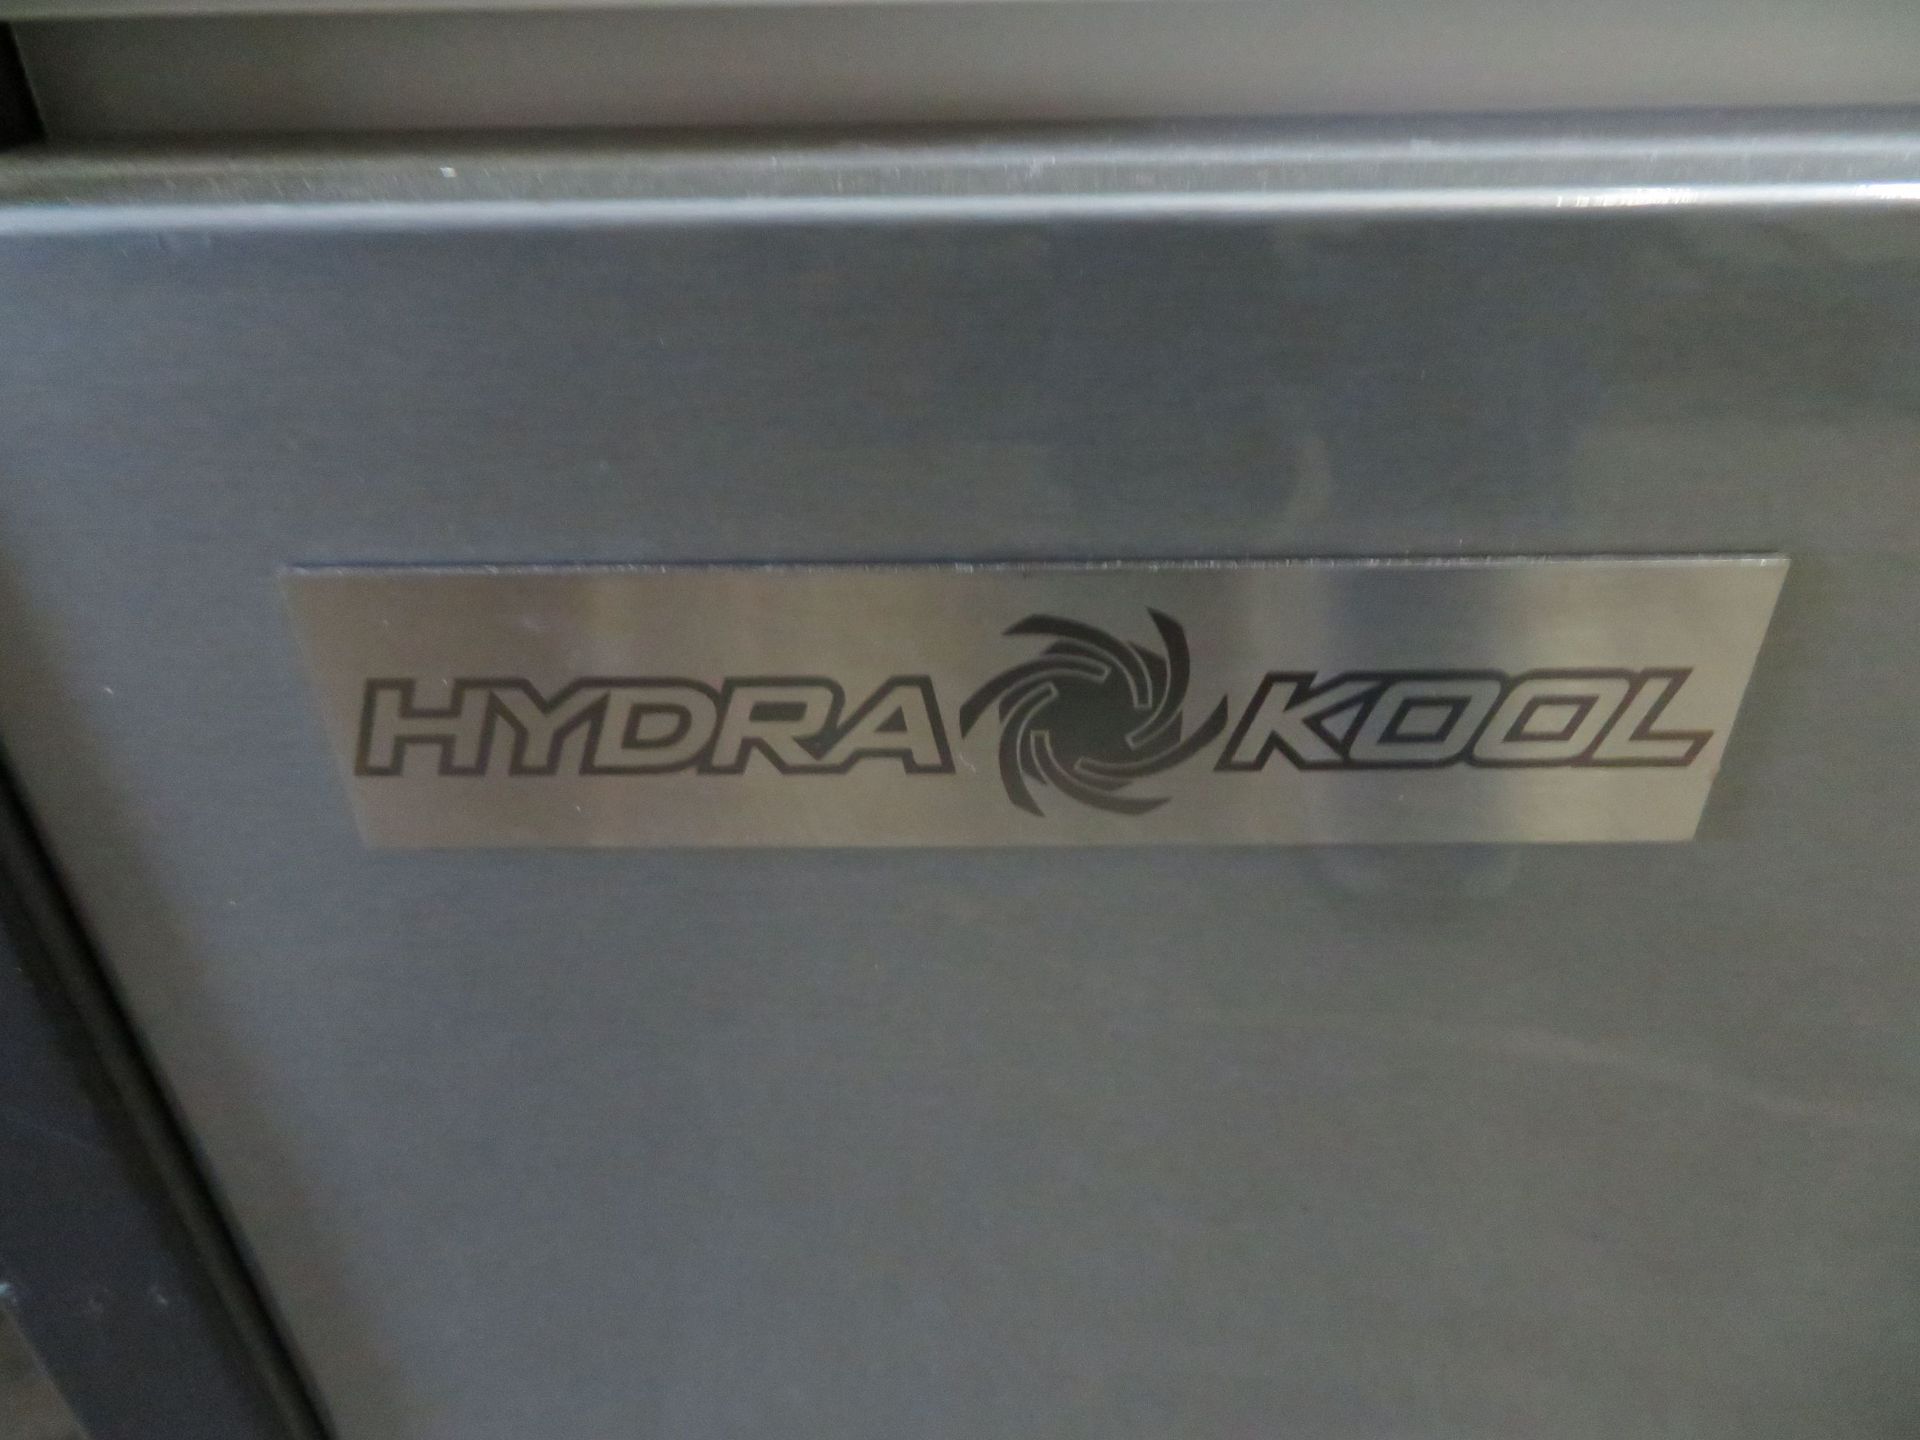 HYDRACOOL open display cooler, Mod: KGLOF-60SA, approx. 59"w x 34"d x 59"h - Image 3 of 3